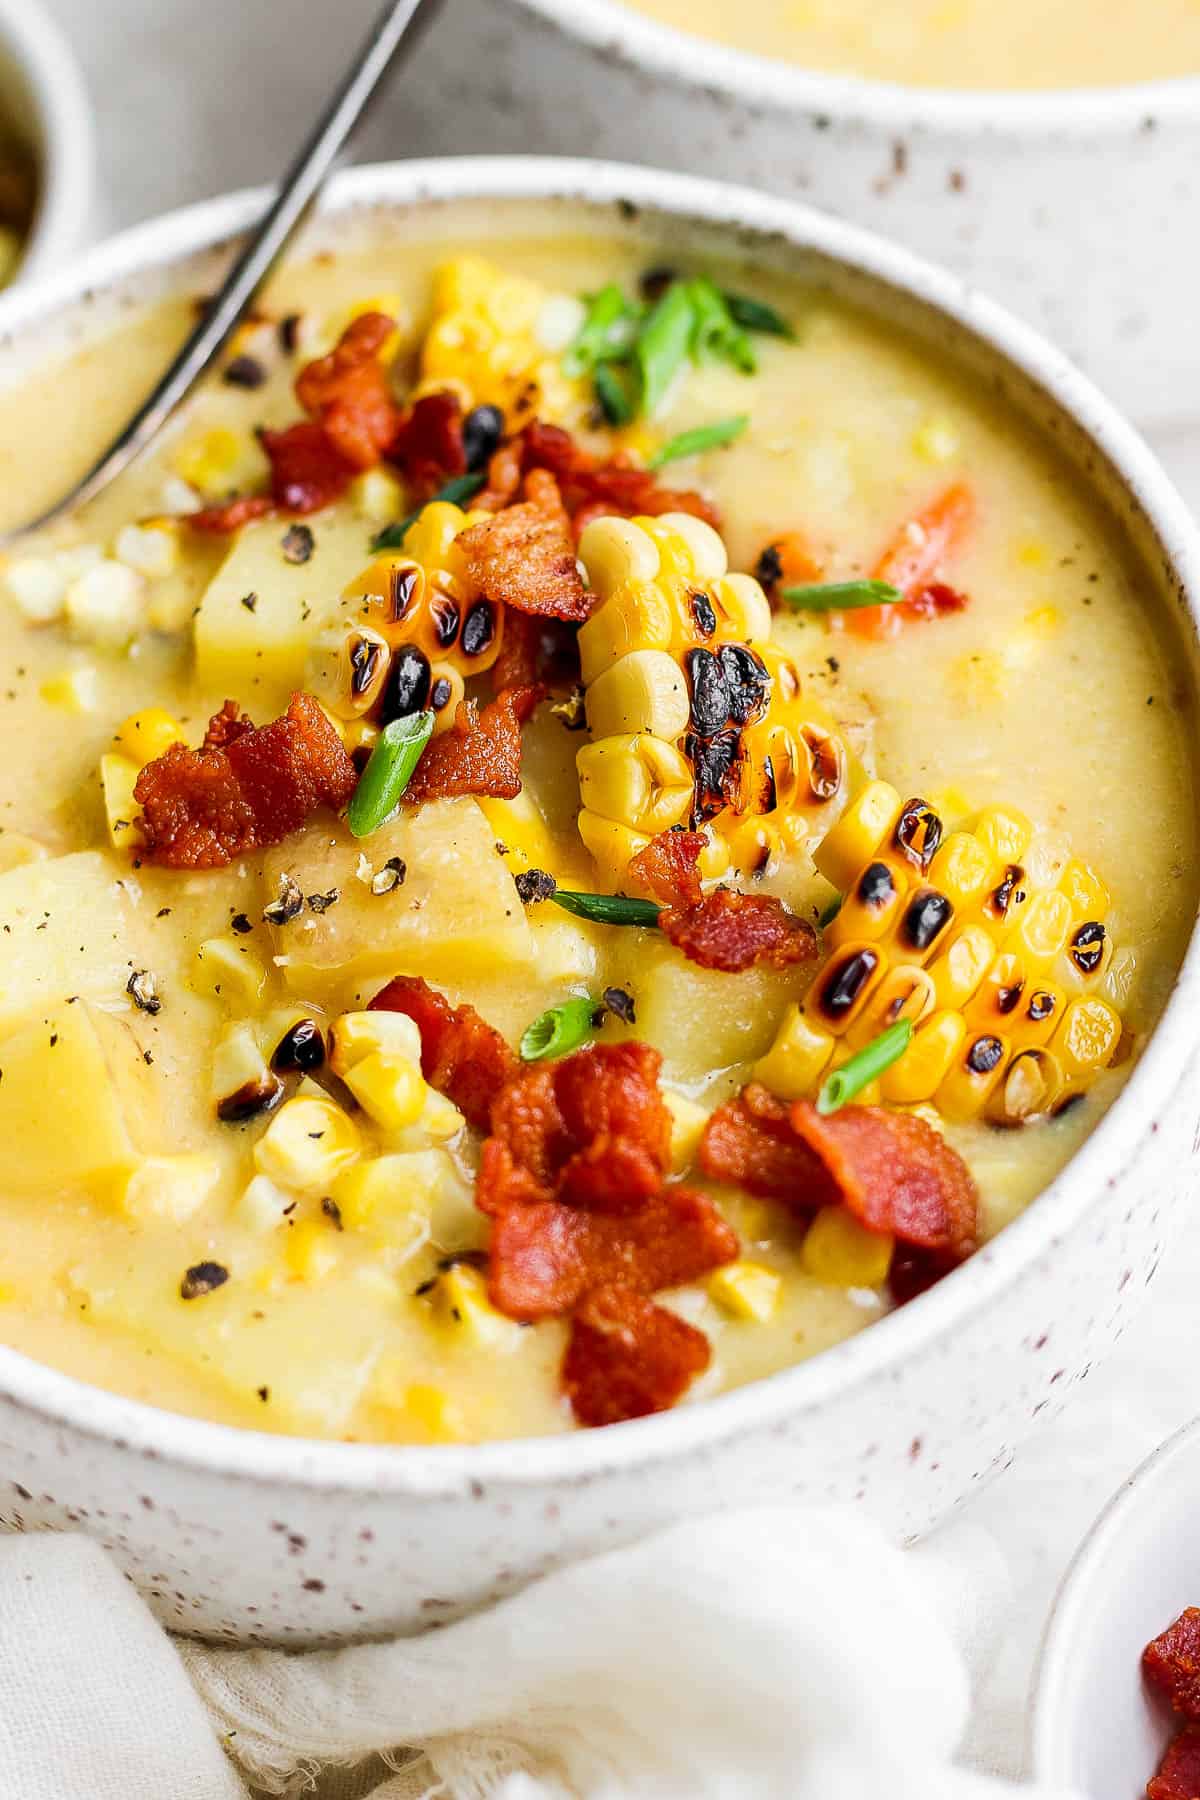 A close-up shot of the corn chowder with toppings.